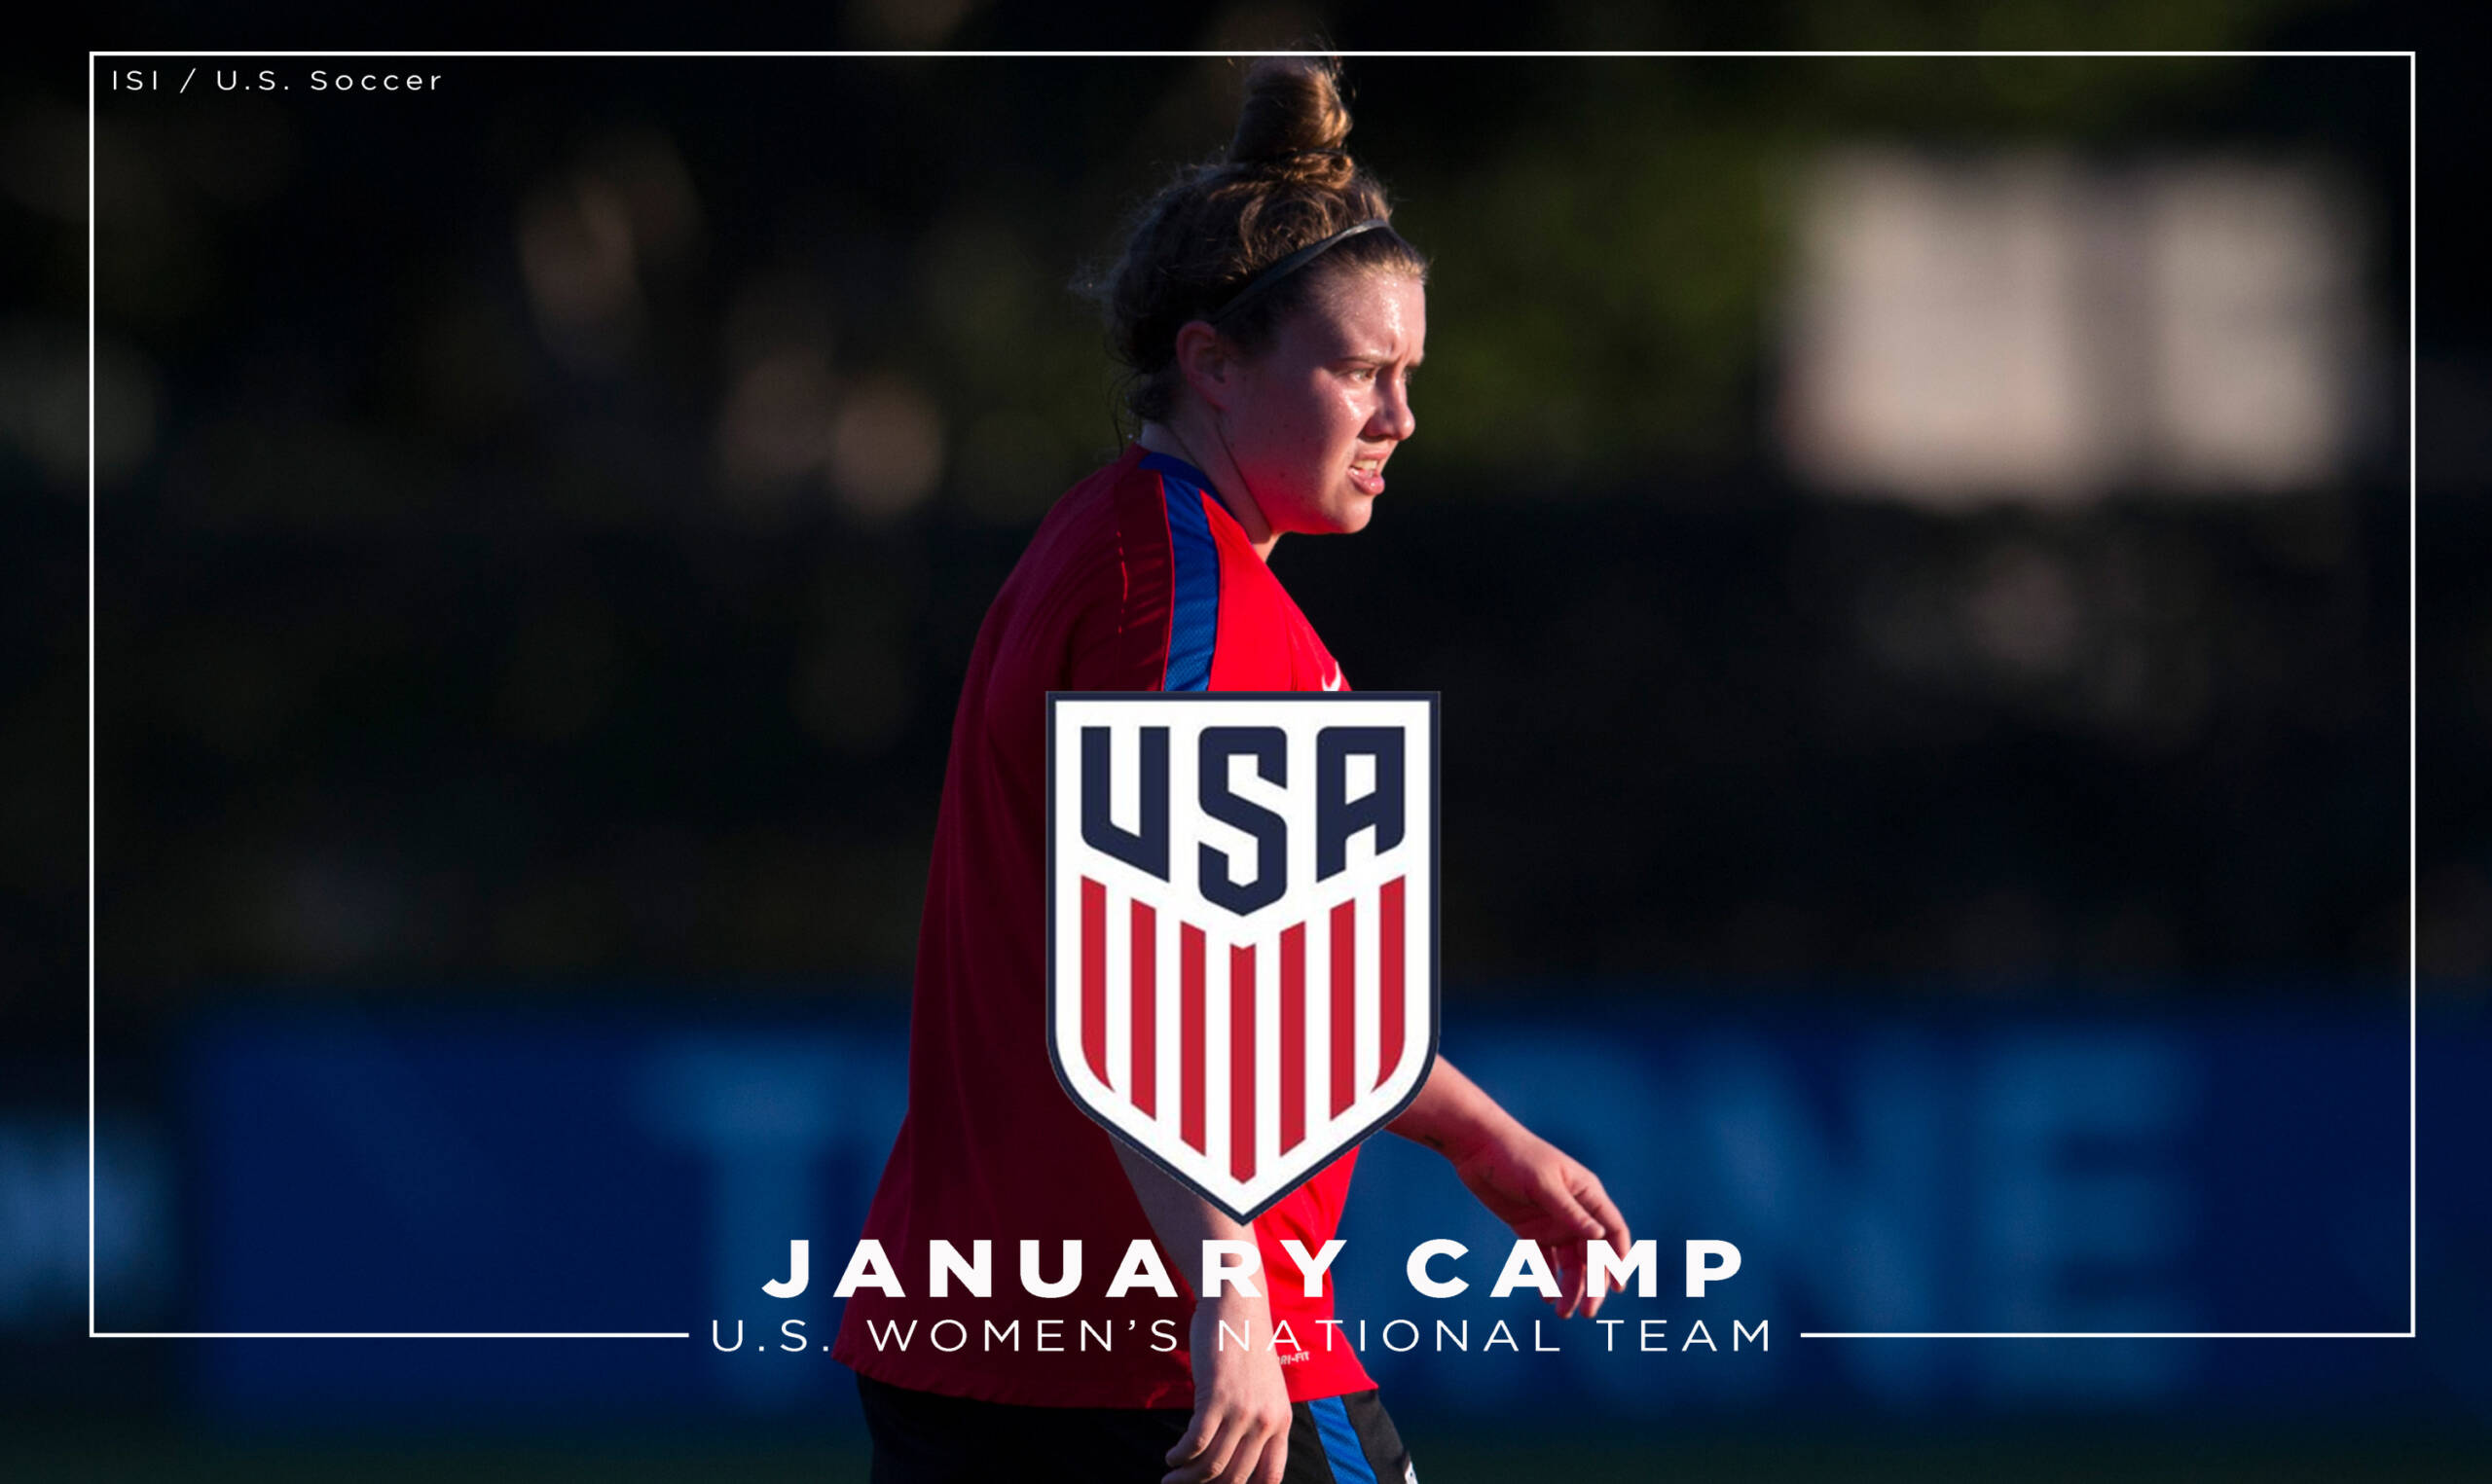 McCaskill To Compete At USWNT's January Camp